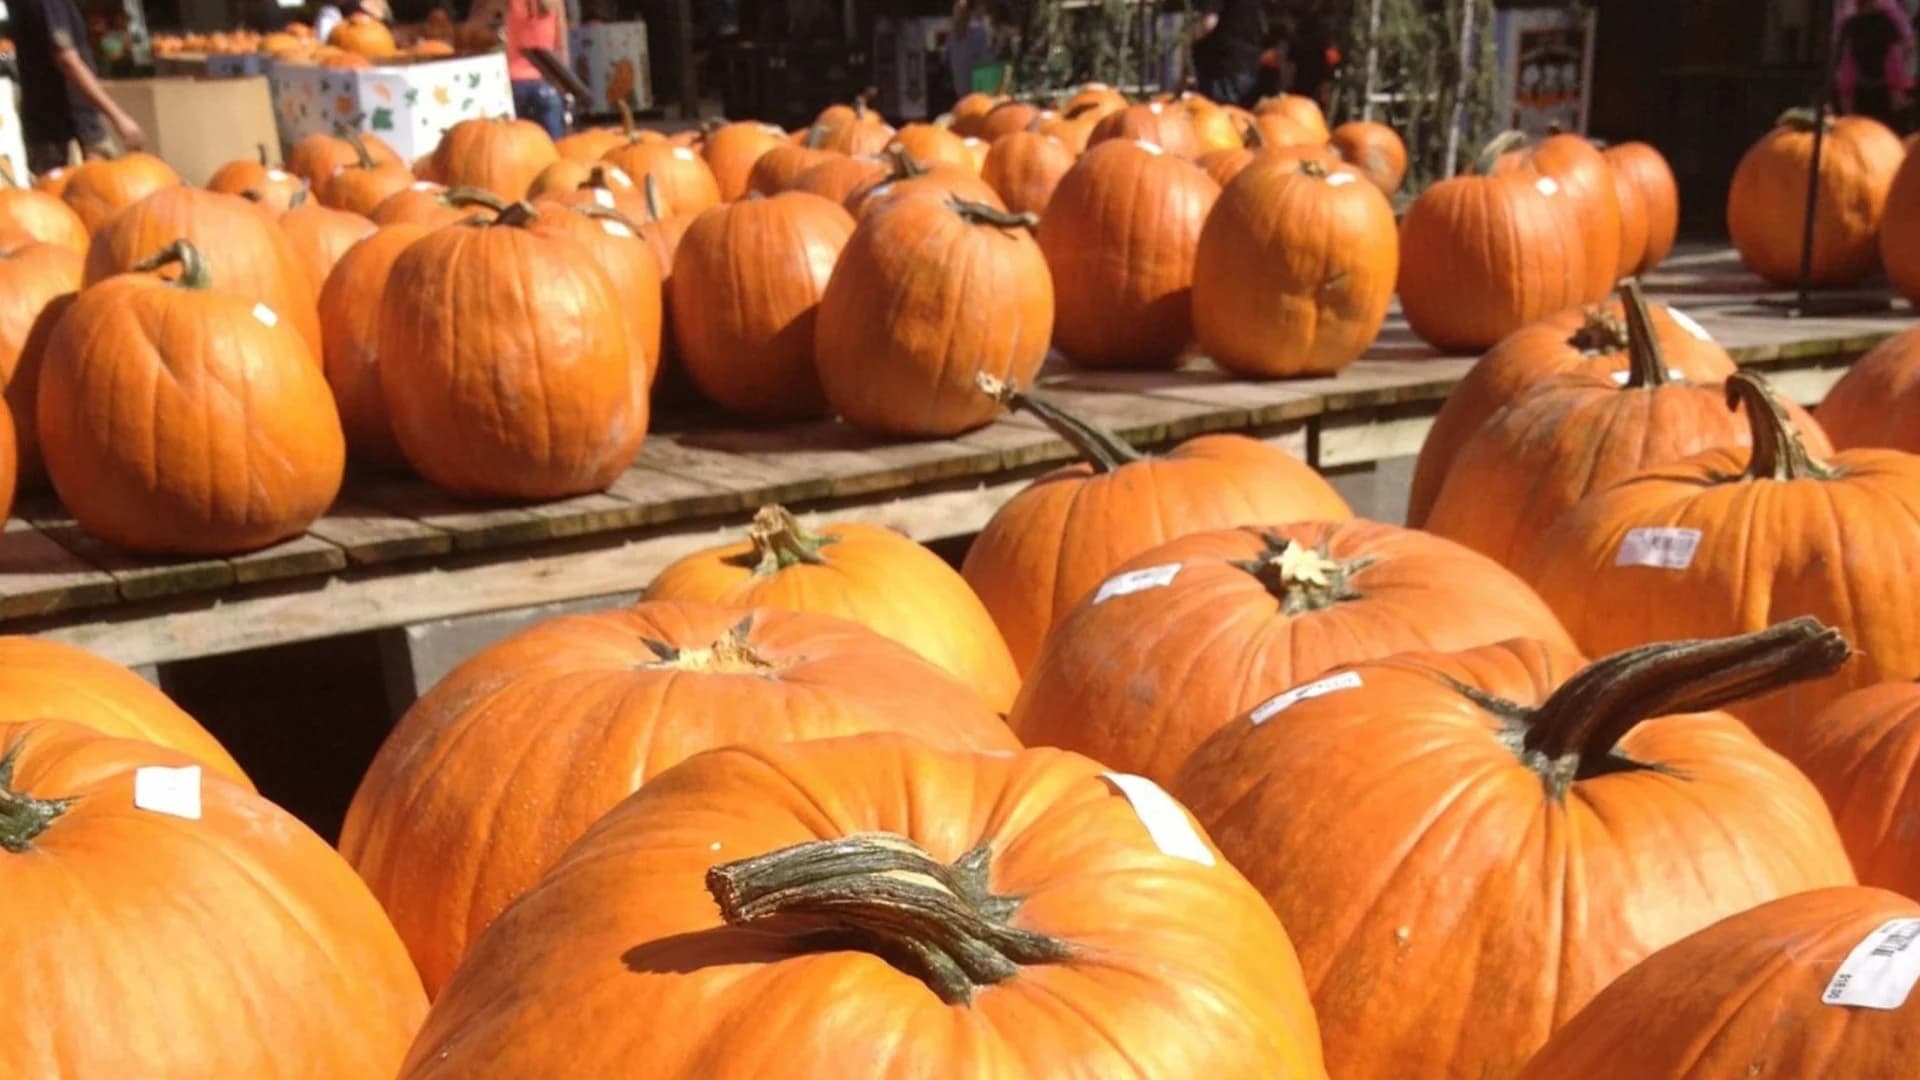 Guide: Where to go pumpkin picking in the Hudson Valley